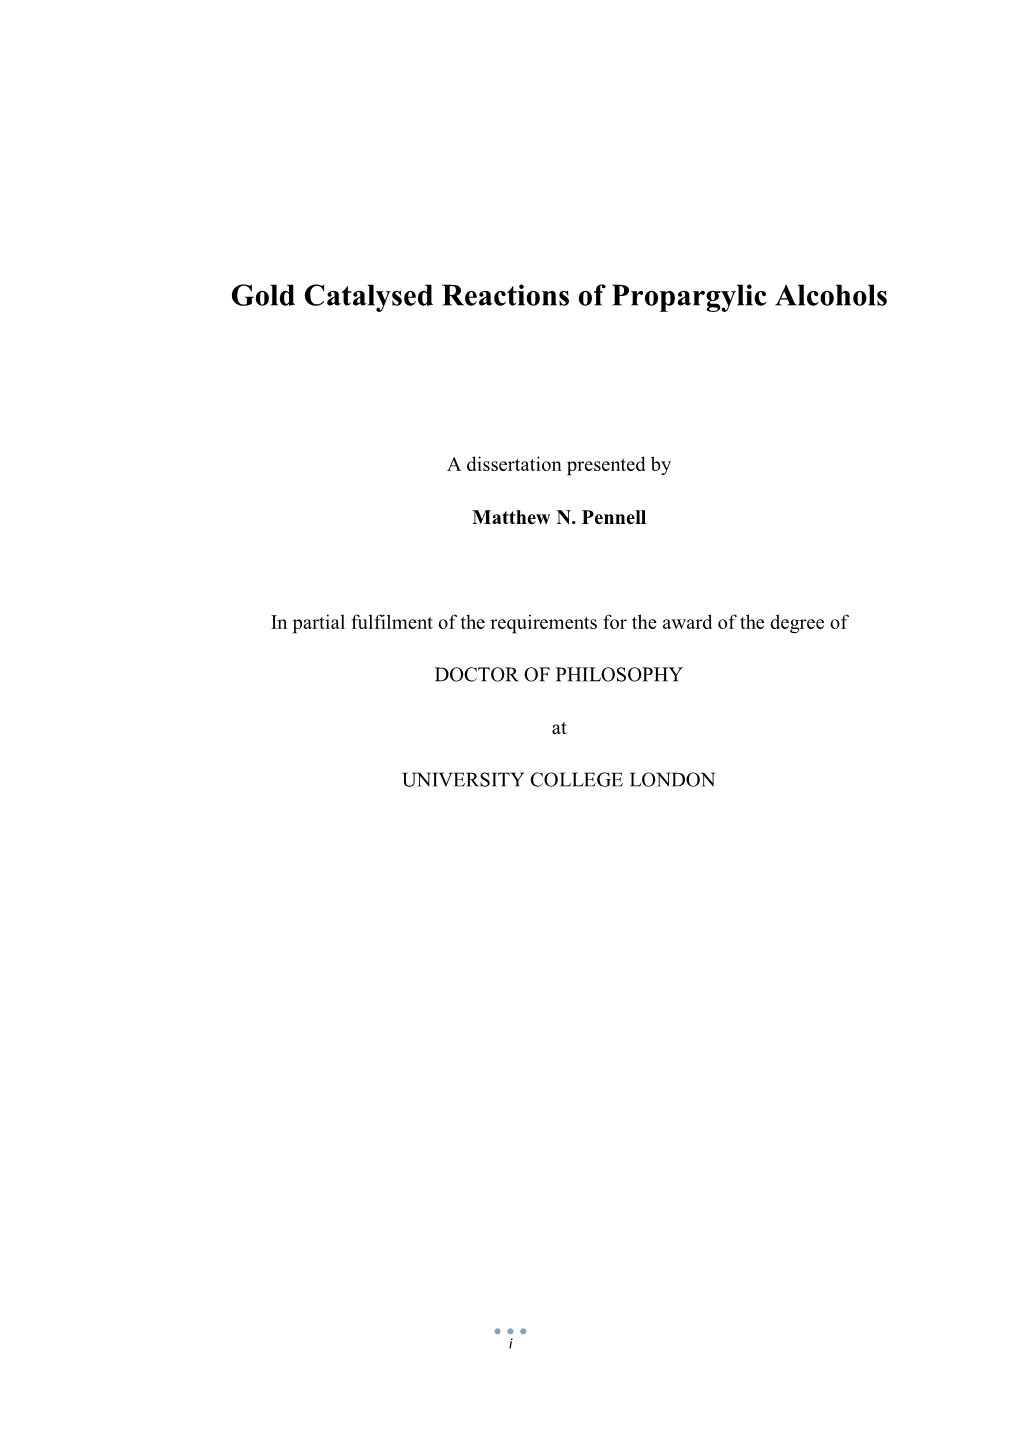 Gold Catalysed Reactions of Propargylic Alcohols